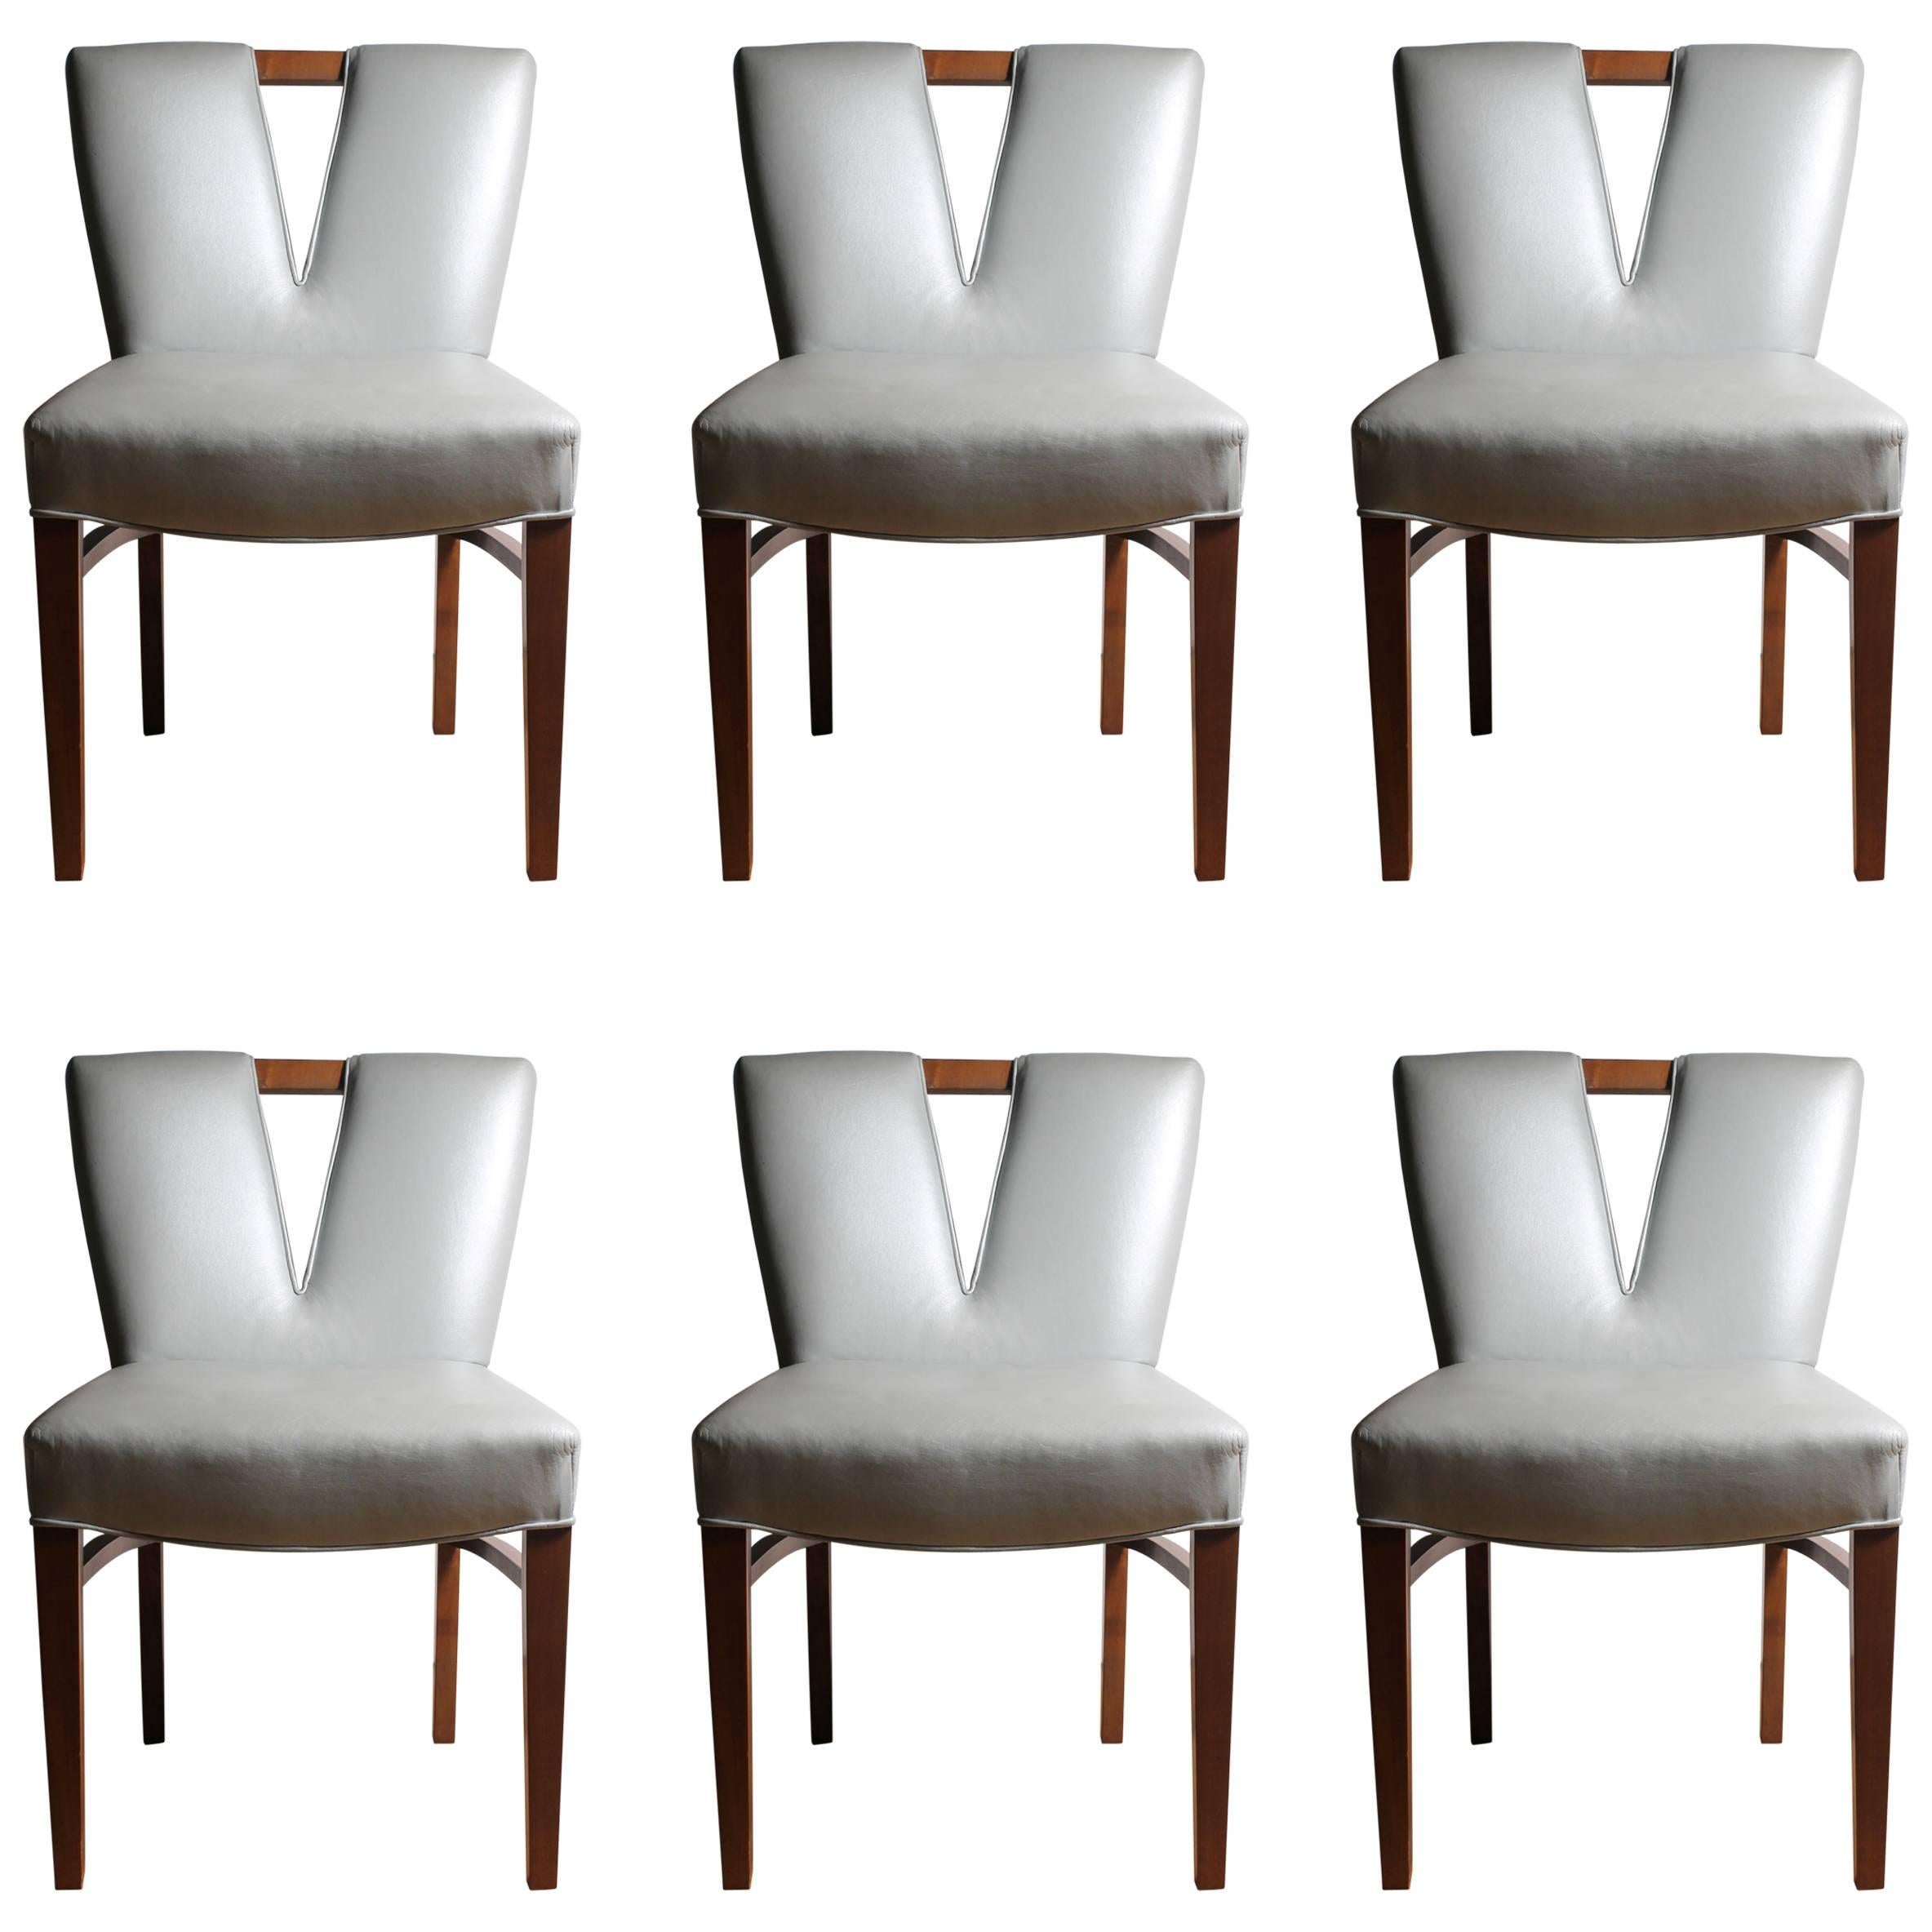 Set of 10 vintage Paul Frankl dining chairs.

2 Armchairs
6 Side Chairs
plus
2 Side Chairs (Once Armchairs - The arms have been removed to appear as side chairs. (Note: The Seat & Back width is slightly wider on these)

10 Chairs